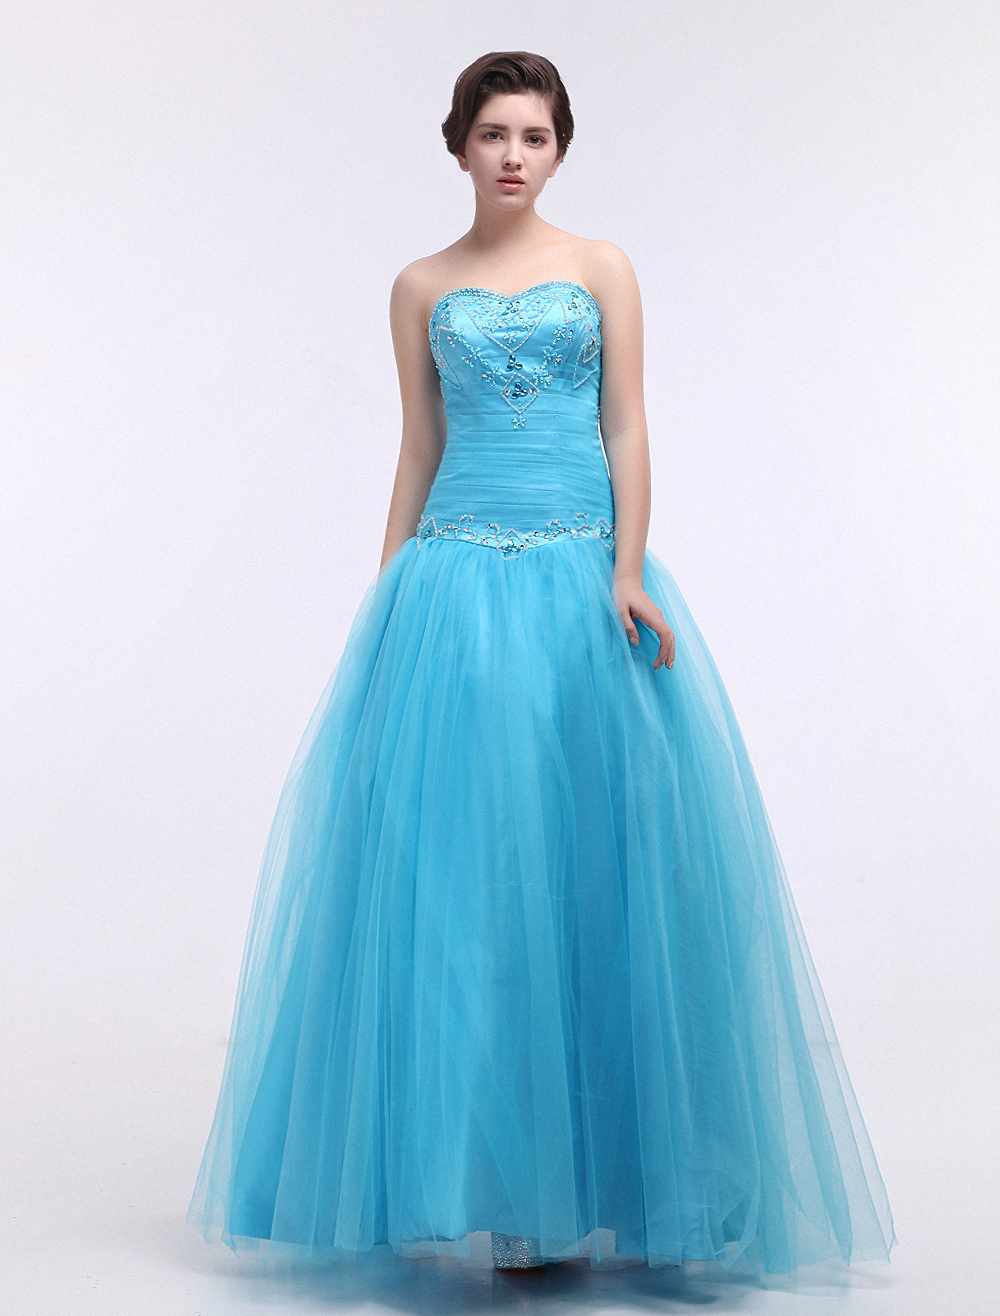 Tulle Quinceanera Dress Ball Gown Aqua Sweetheart Strapless Beading ...